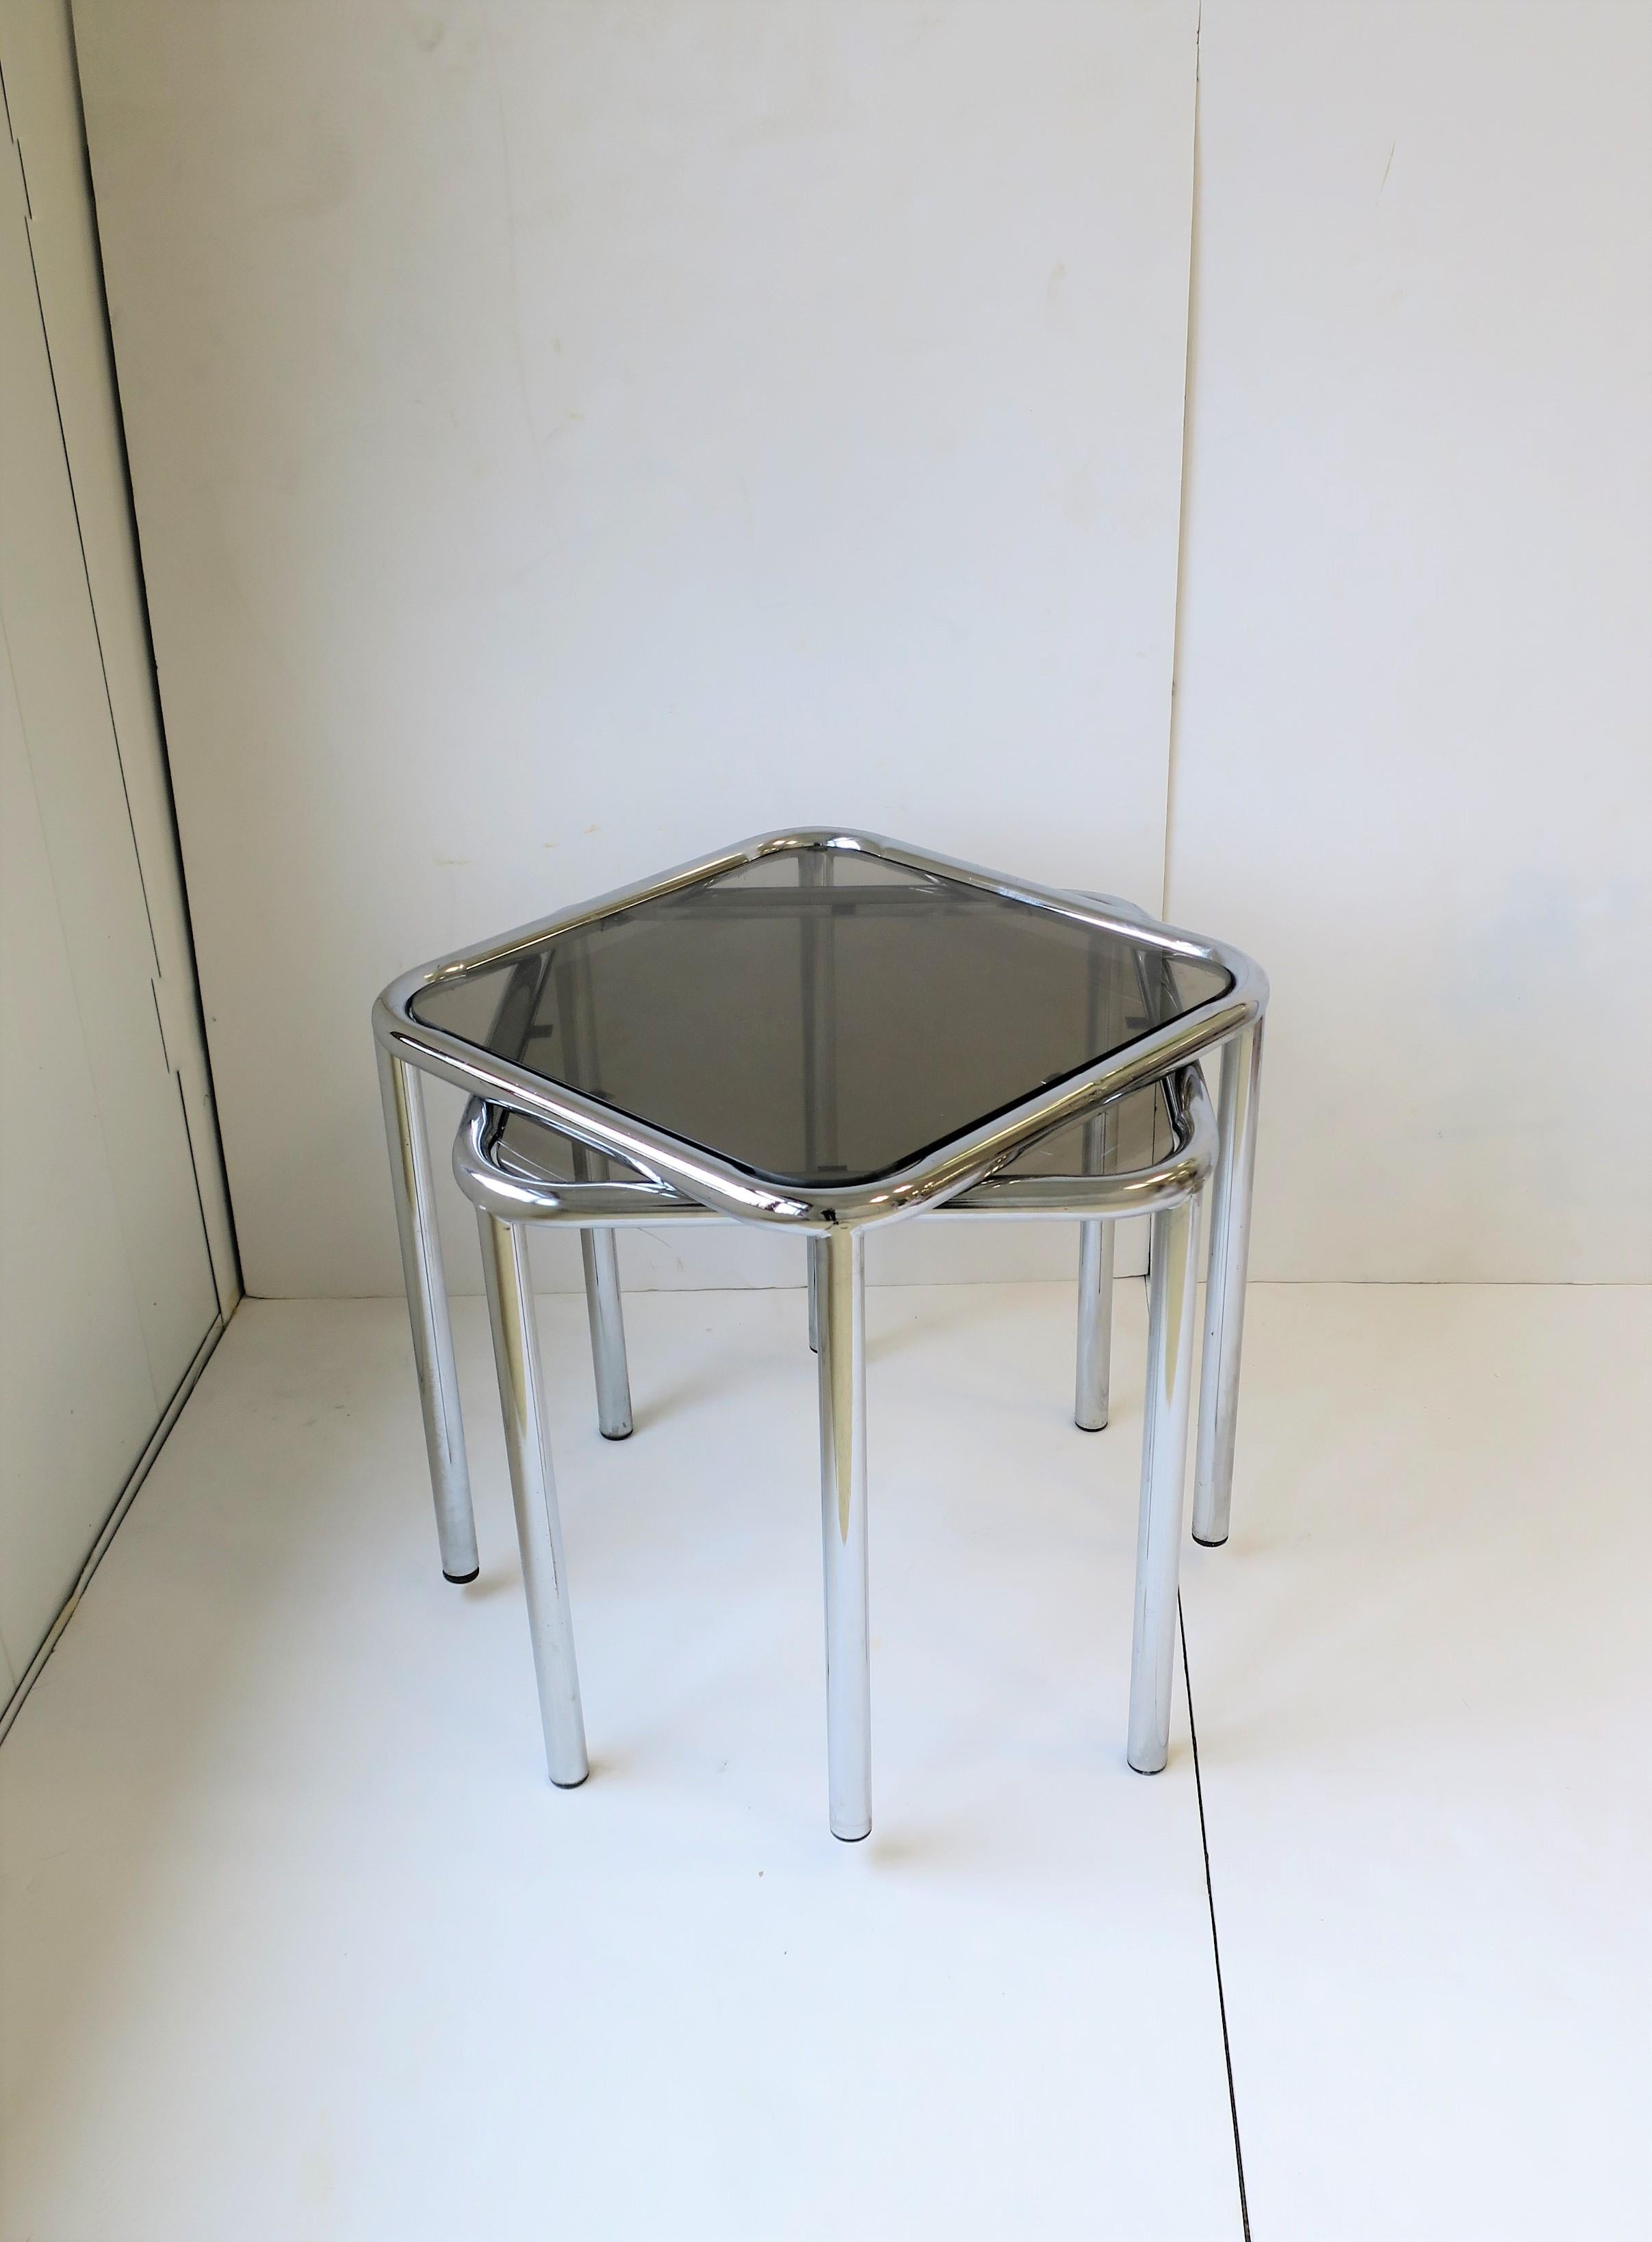 A substantial set/pair of end, side, and stacking tables, circa 1970s Modern or Postmodern period. Base frames are a tubular chrome and tops are a smoked glass, both finished with rounded corners. Glass sits 'in-set' into table frame/base. Tables